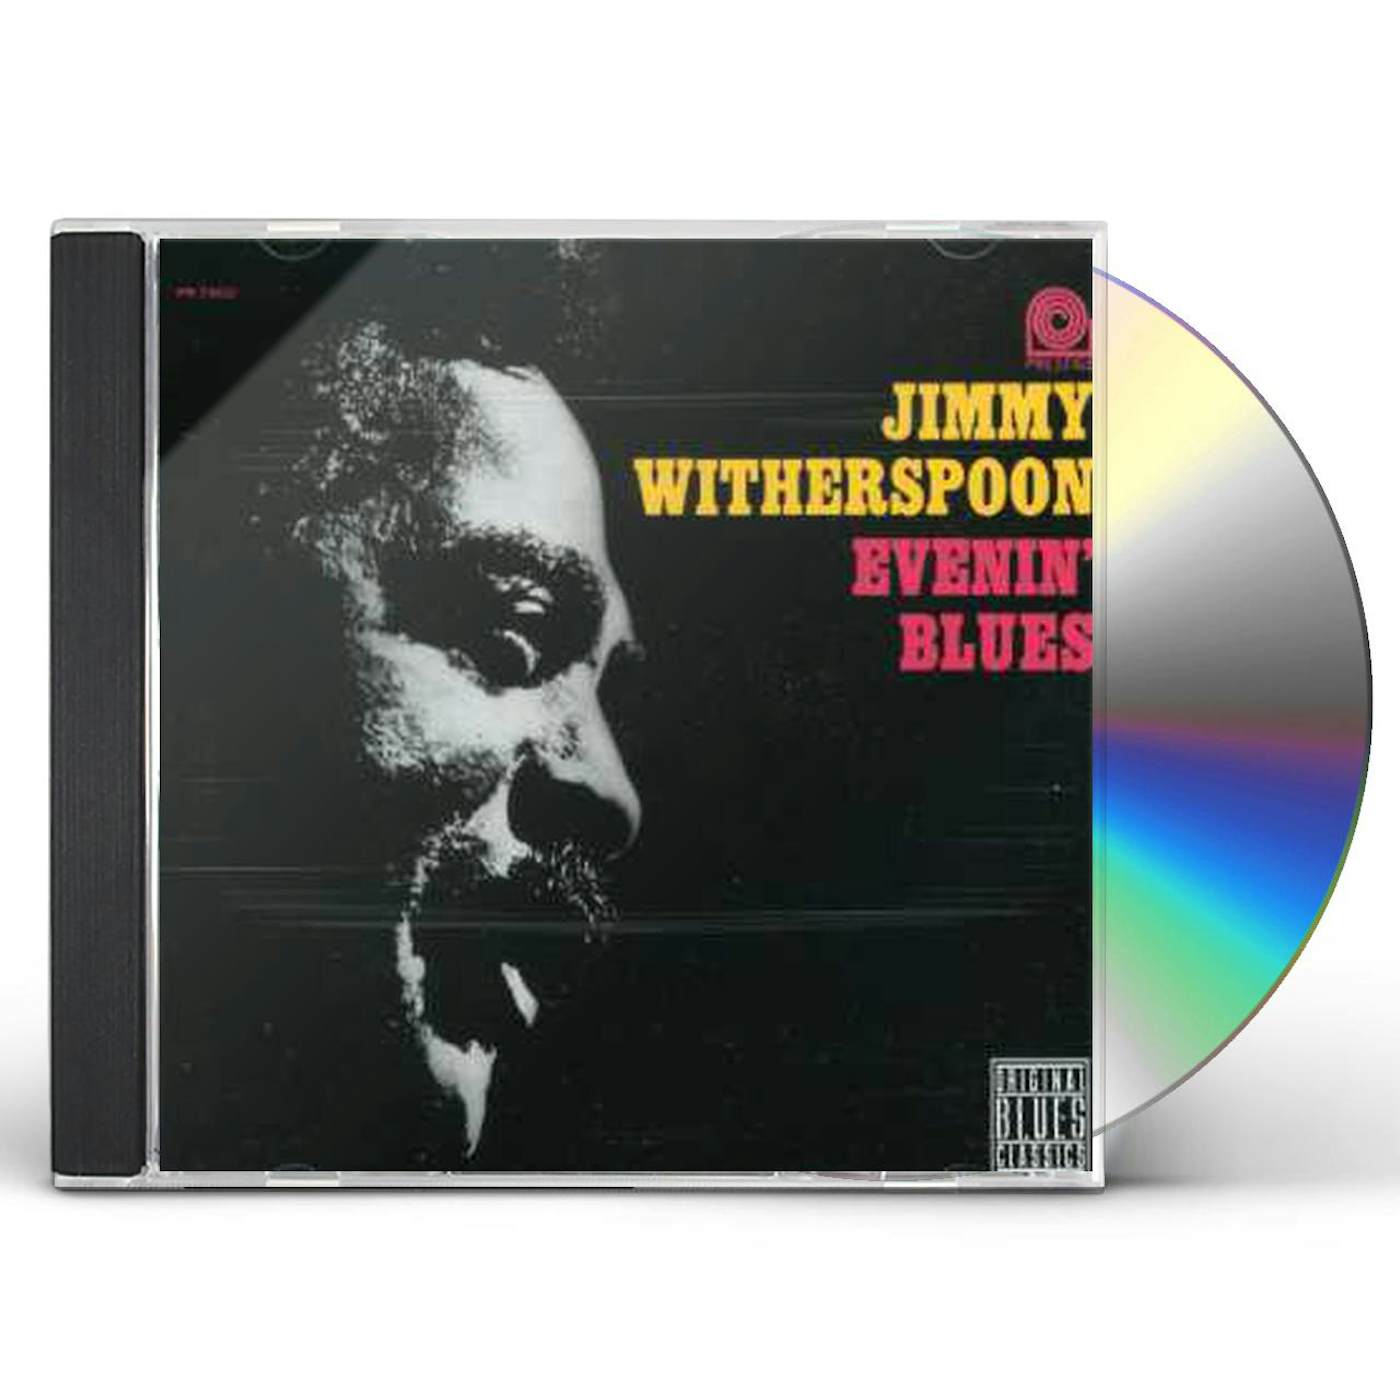 Jimmy Witherspoon EVENIN' BLUES CD